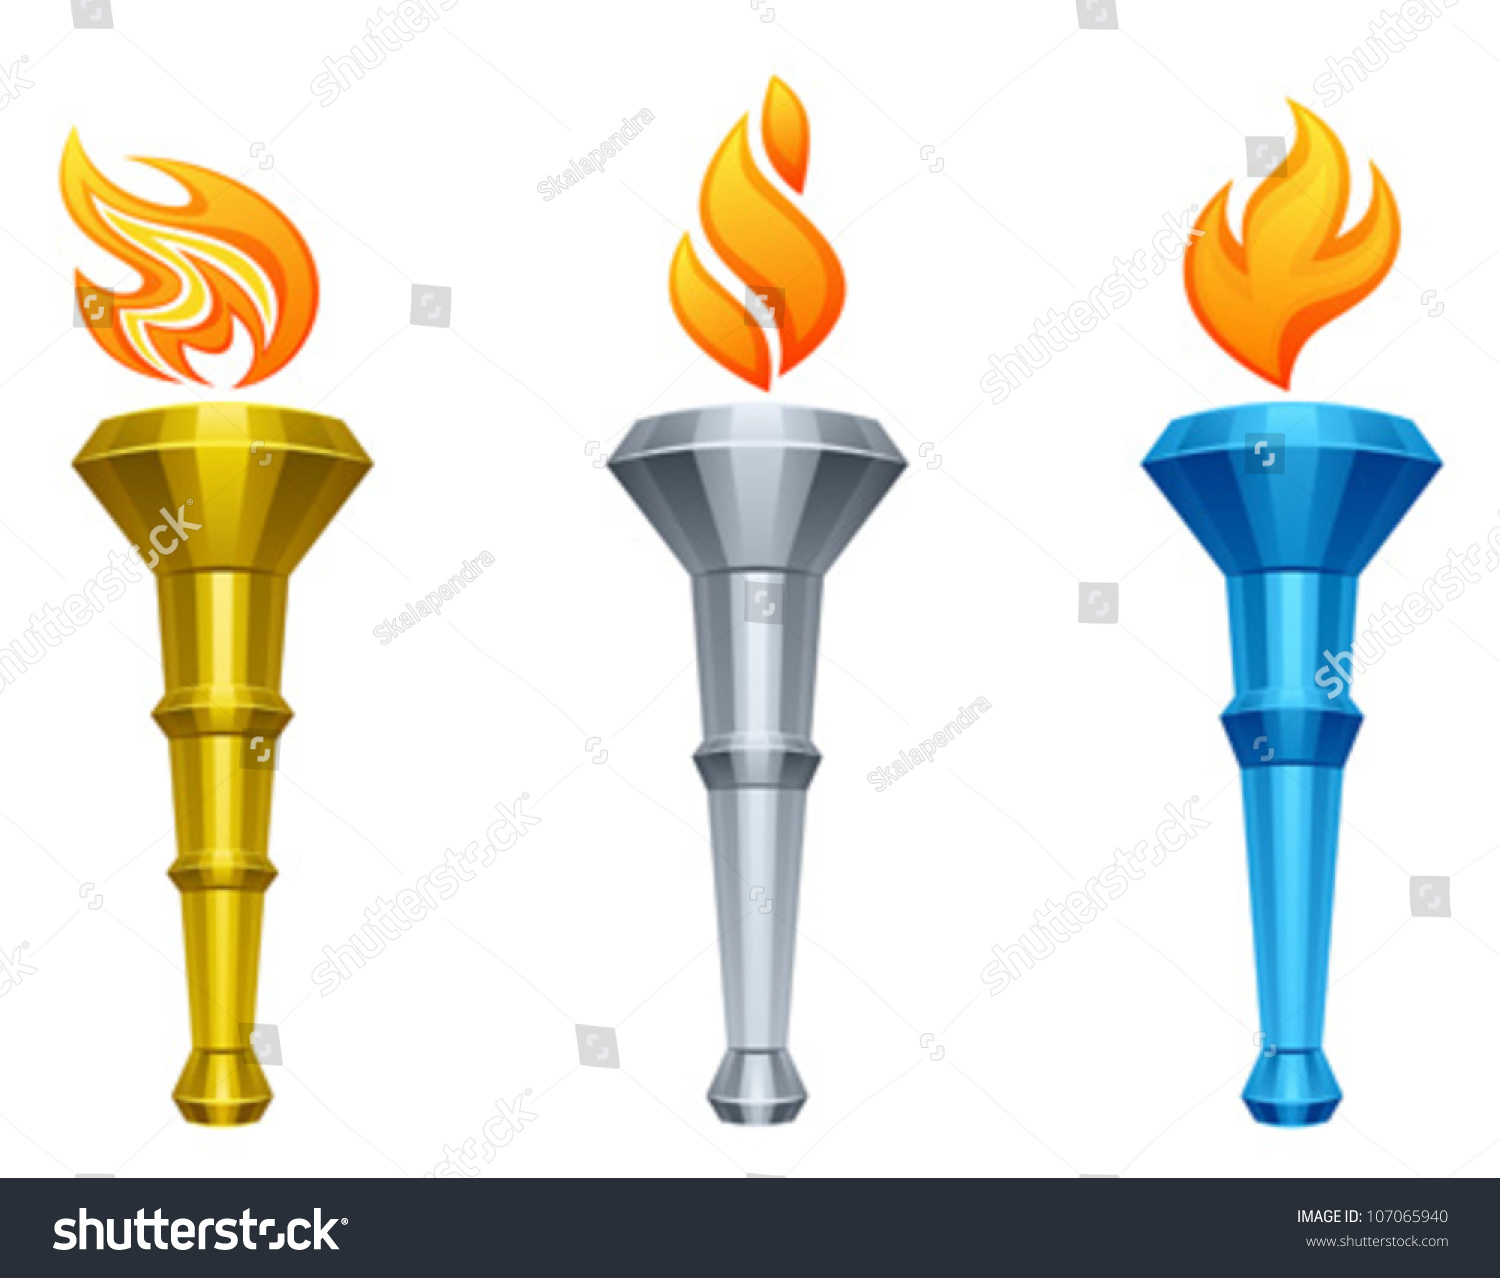 vector clipart torch - photo #38